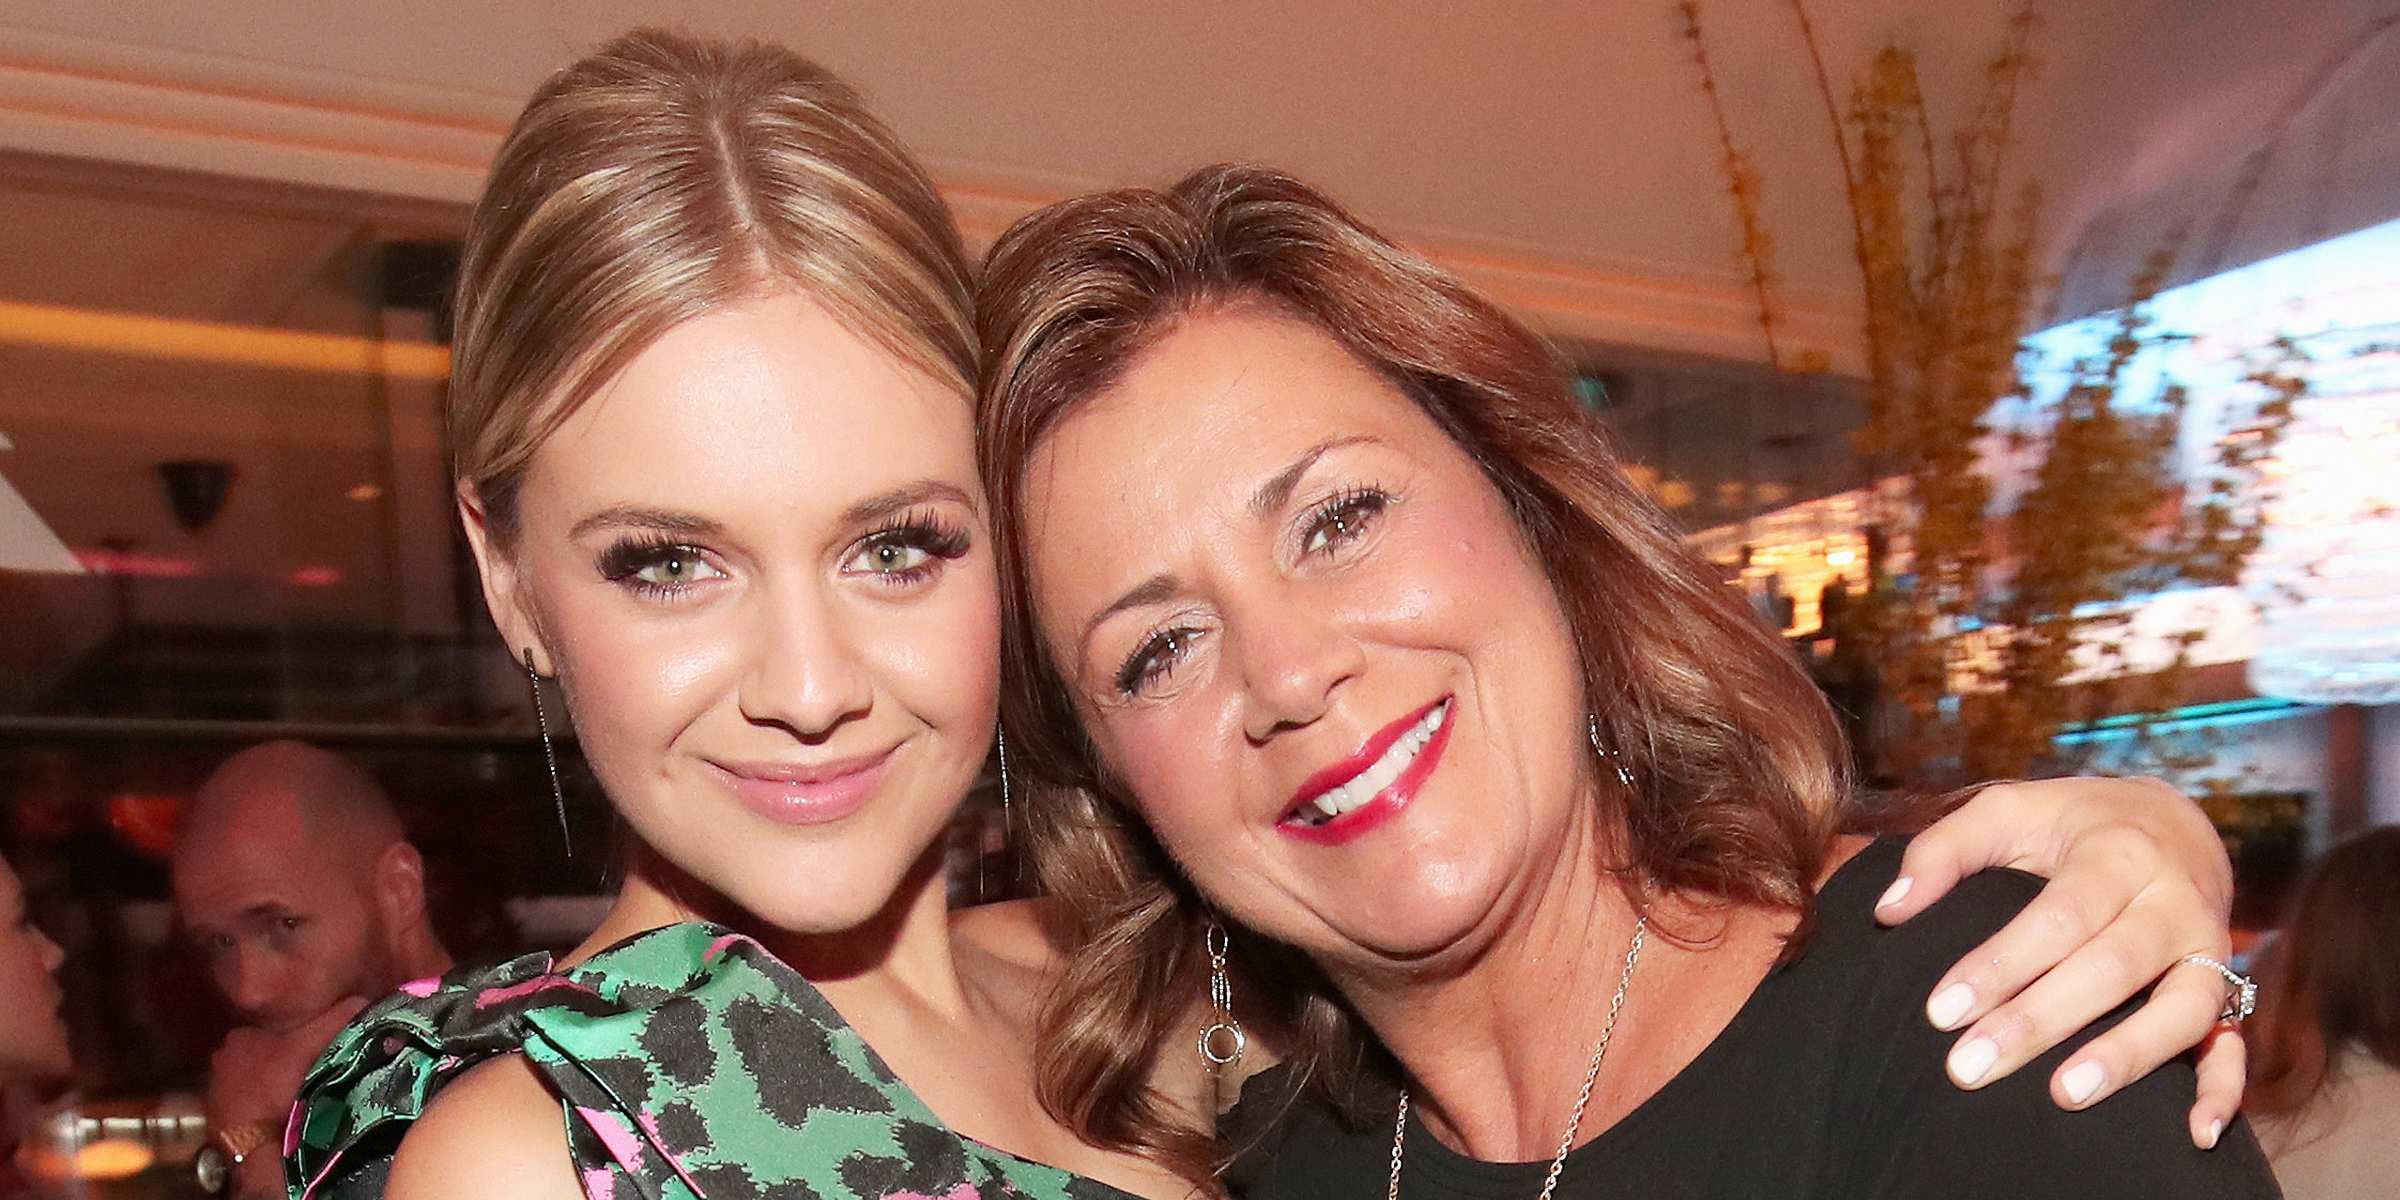 Kelsea Ballerini and Her Mom Carla | Source: Getty Images